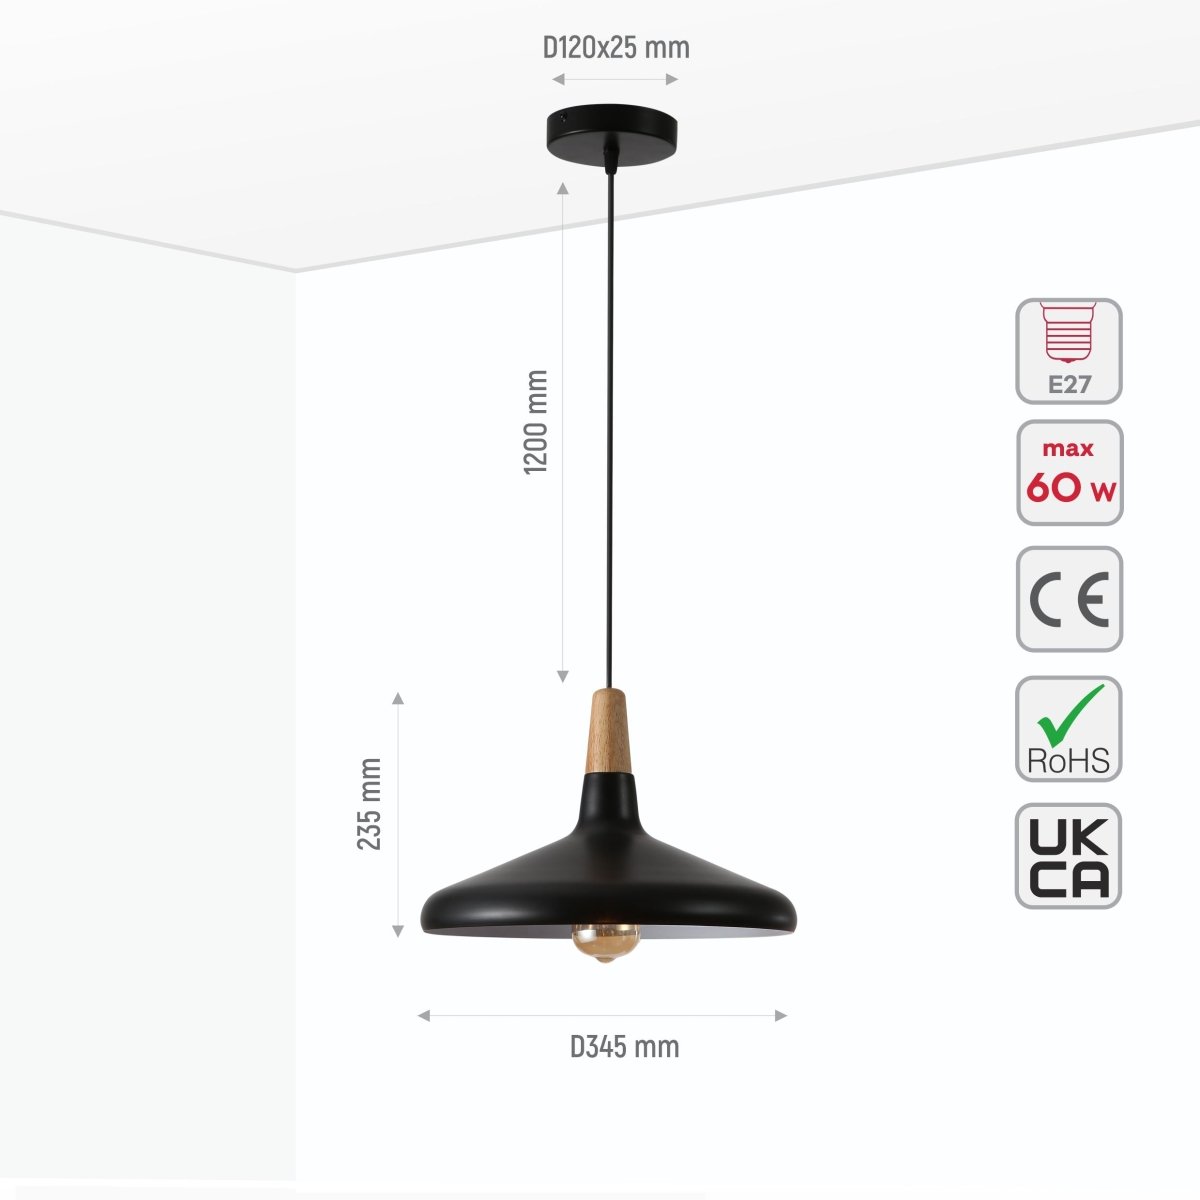 Size and specs of Capo Funnel Cone Flat Nordic Wood Top White or Black Designer Metal Pendant Ceiling Light E27 | TEKLED 150-18034